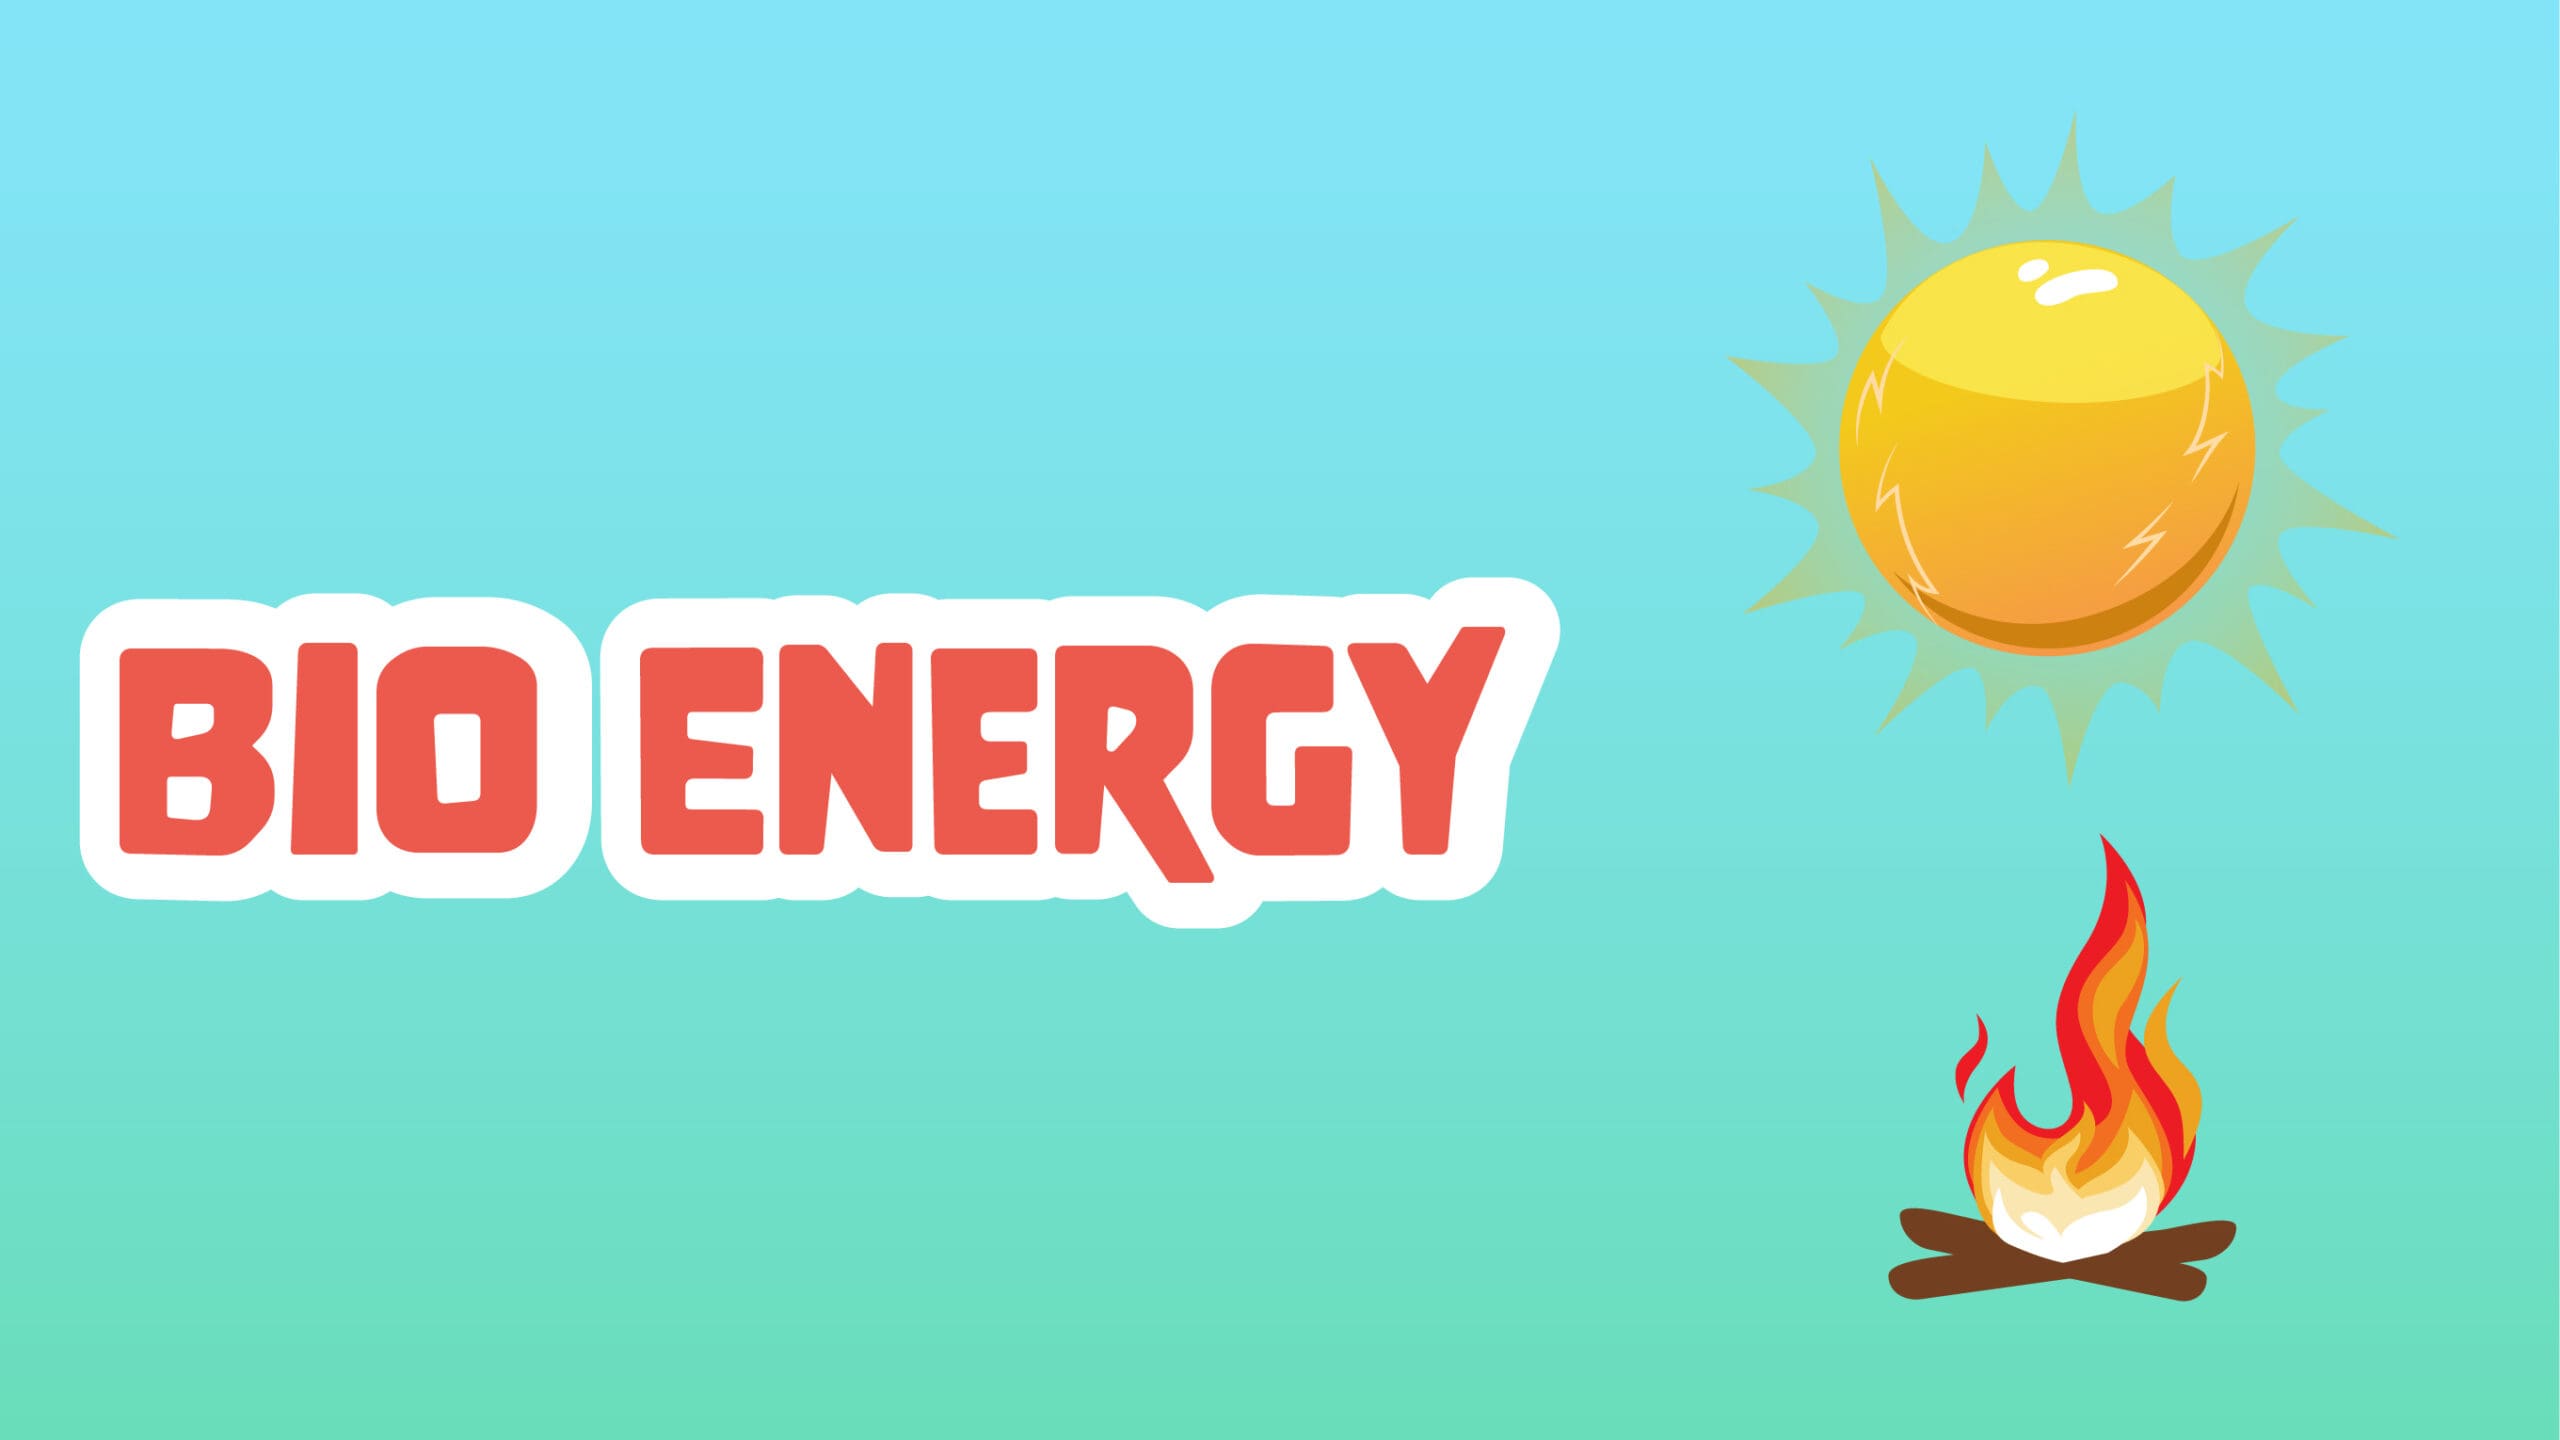 Bio Energy Facts for Kids – 5 Brilliant Facts about Bio Energy